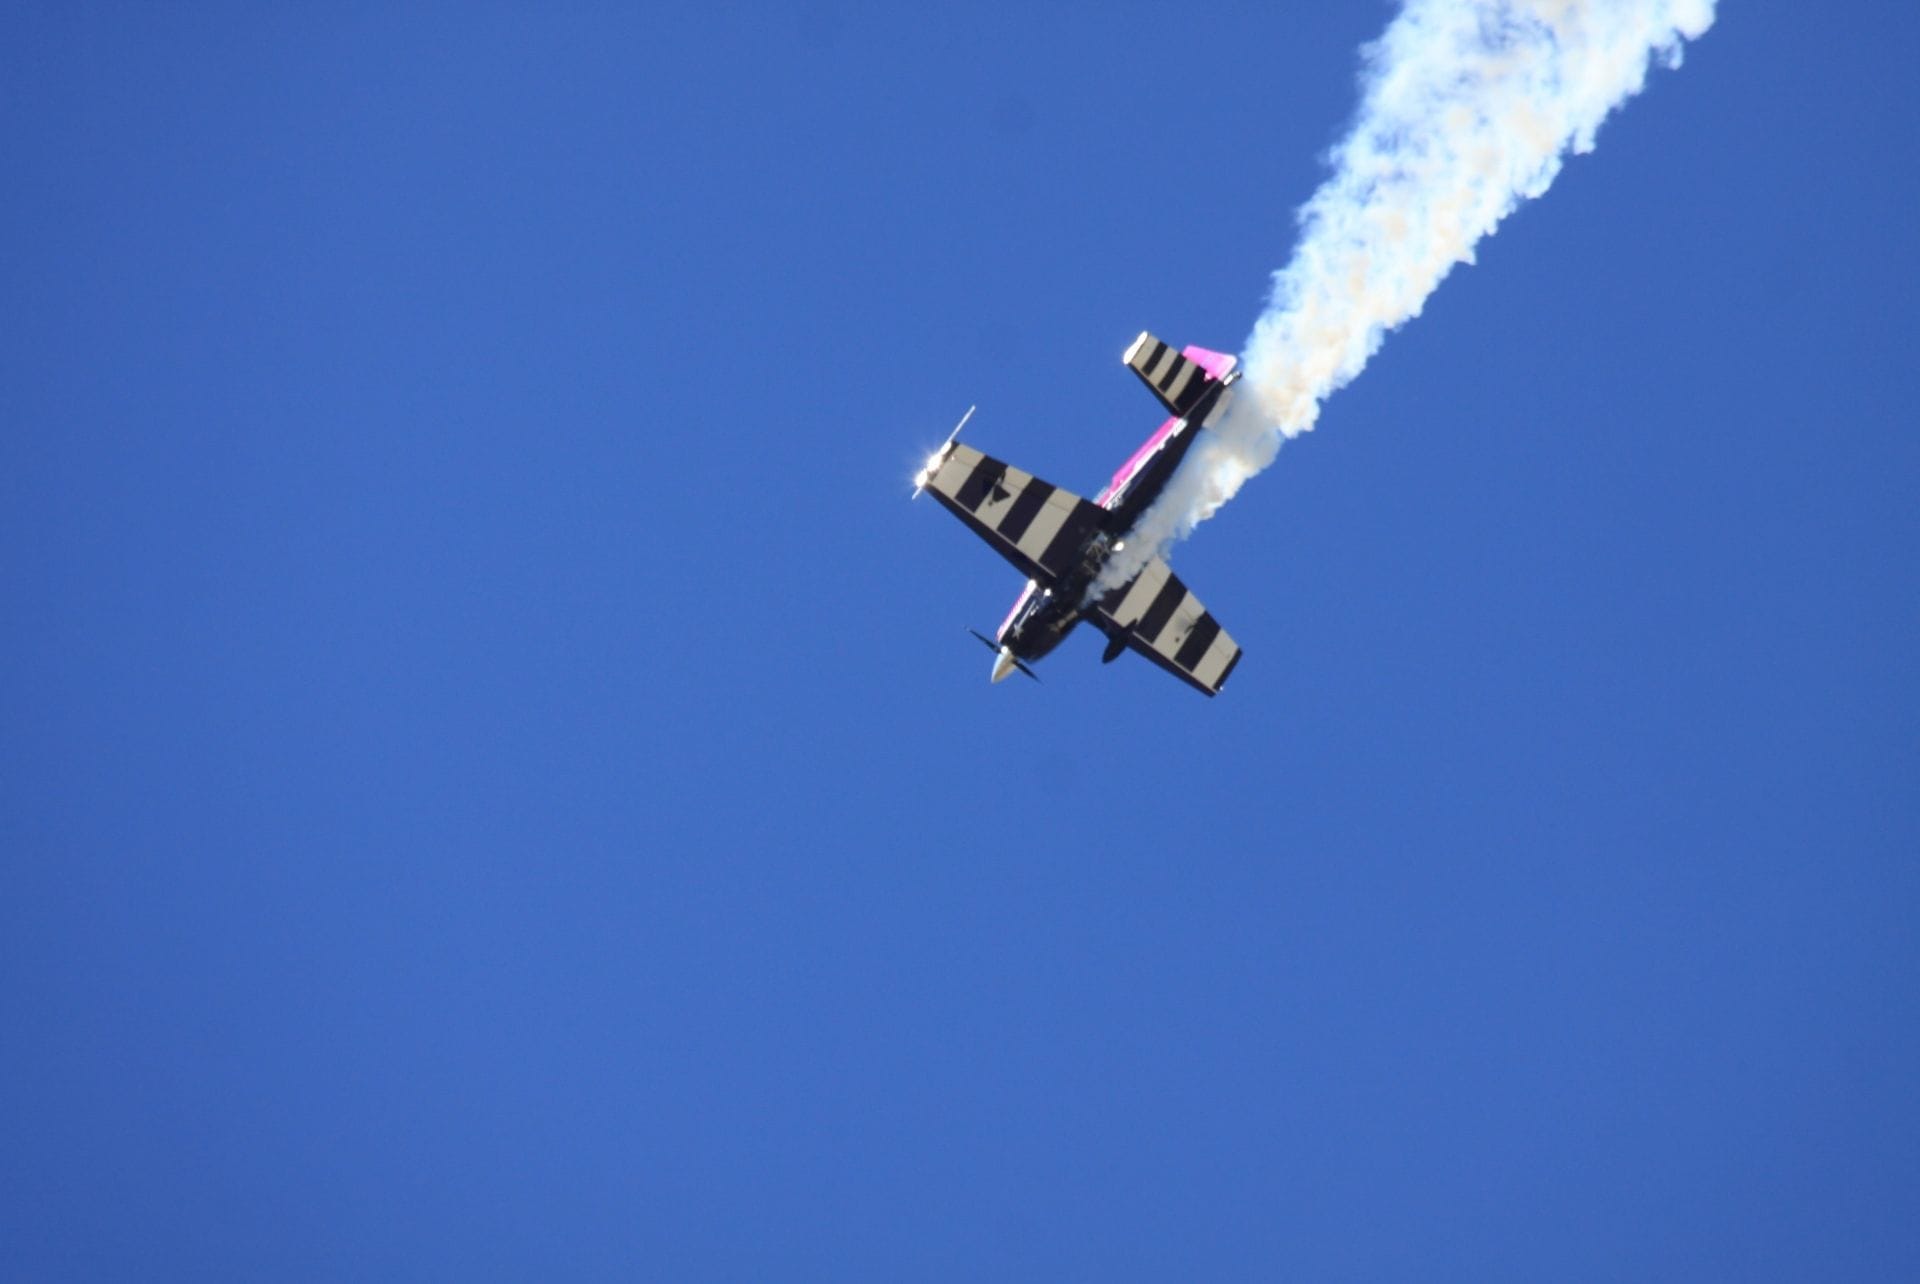 Air Show - Wings Over Camarillo